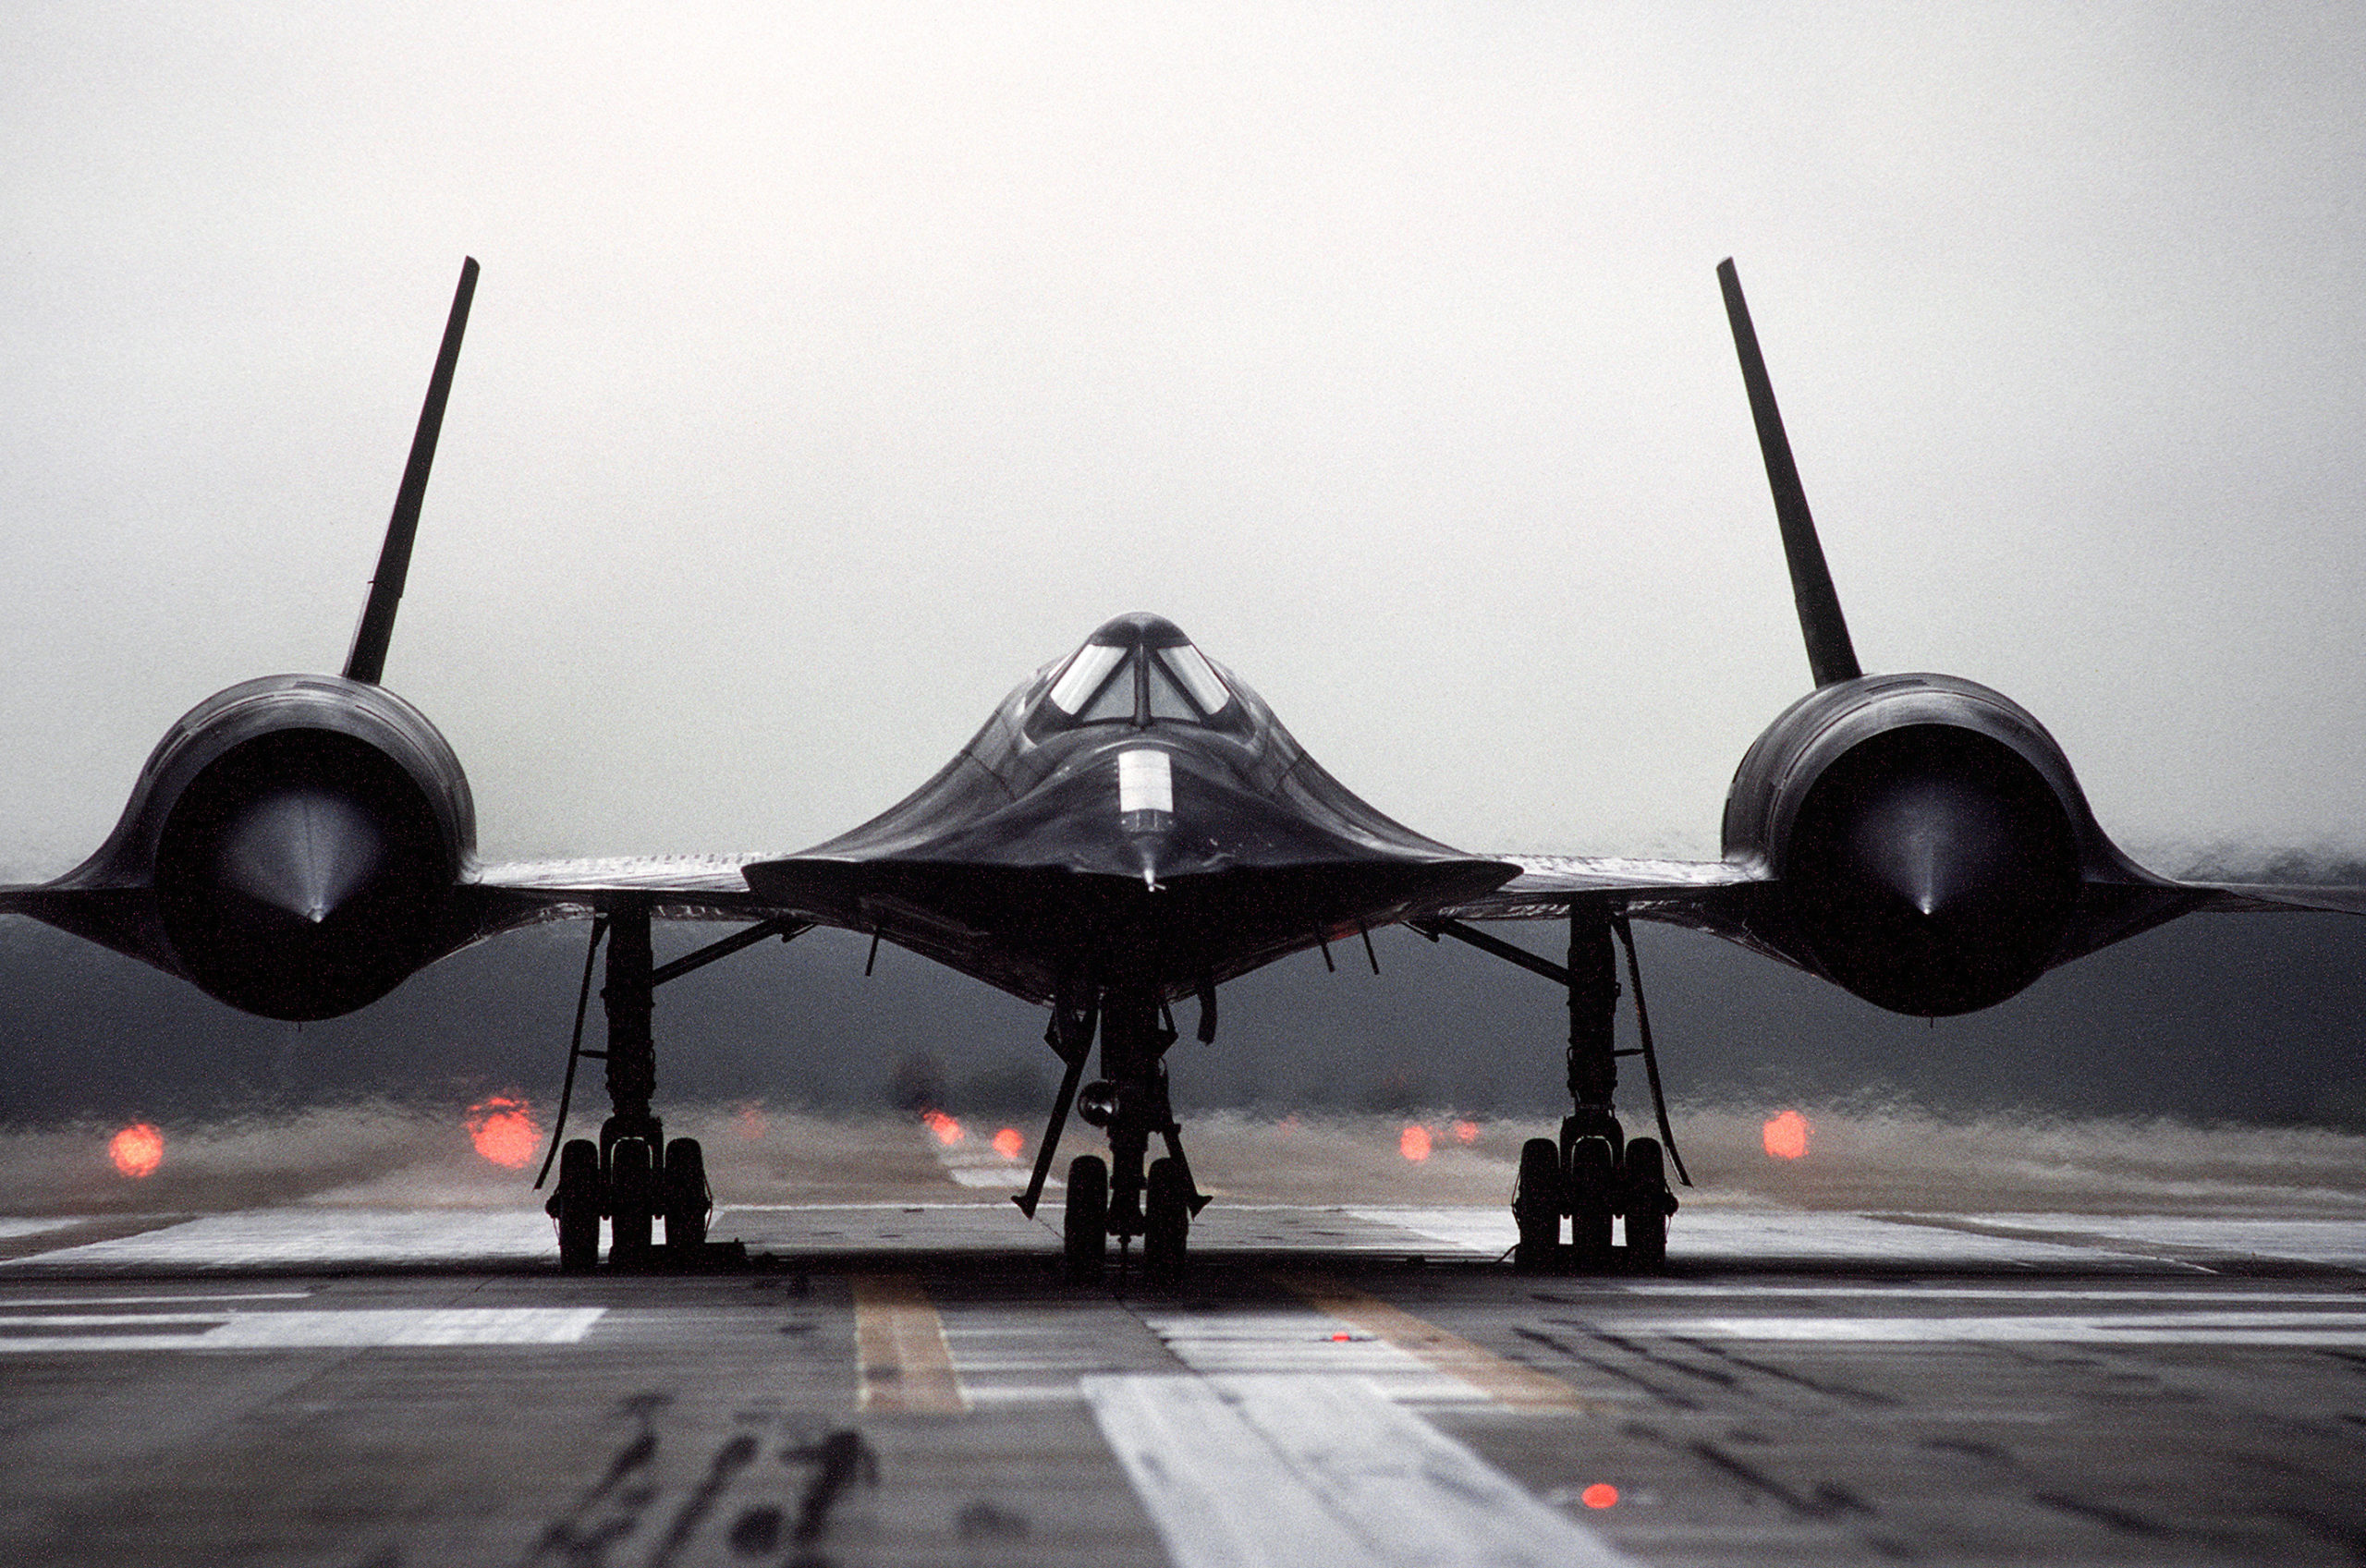 SR 72 U.S. Is Building The Fastest Aircraft In The World